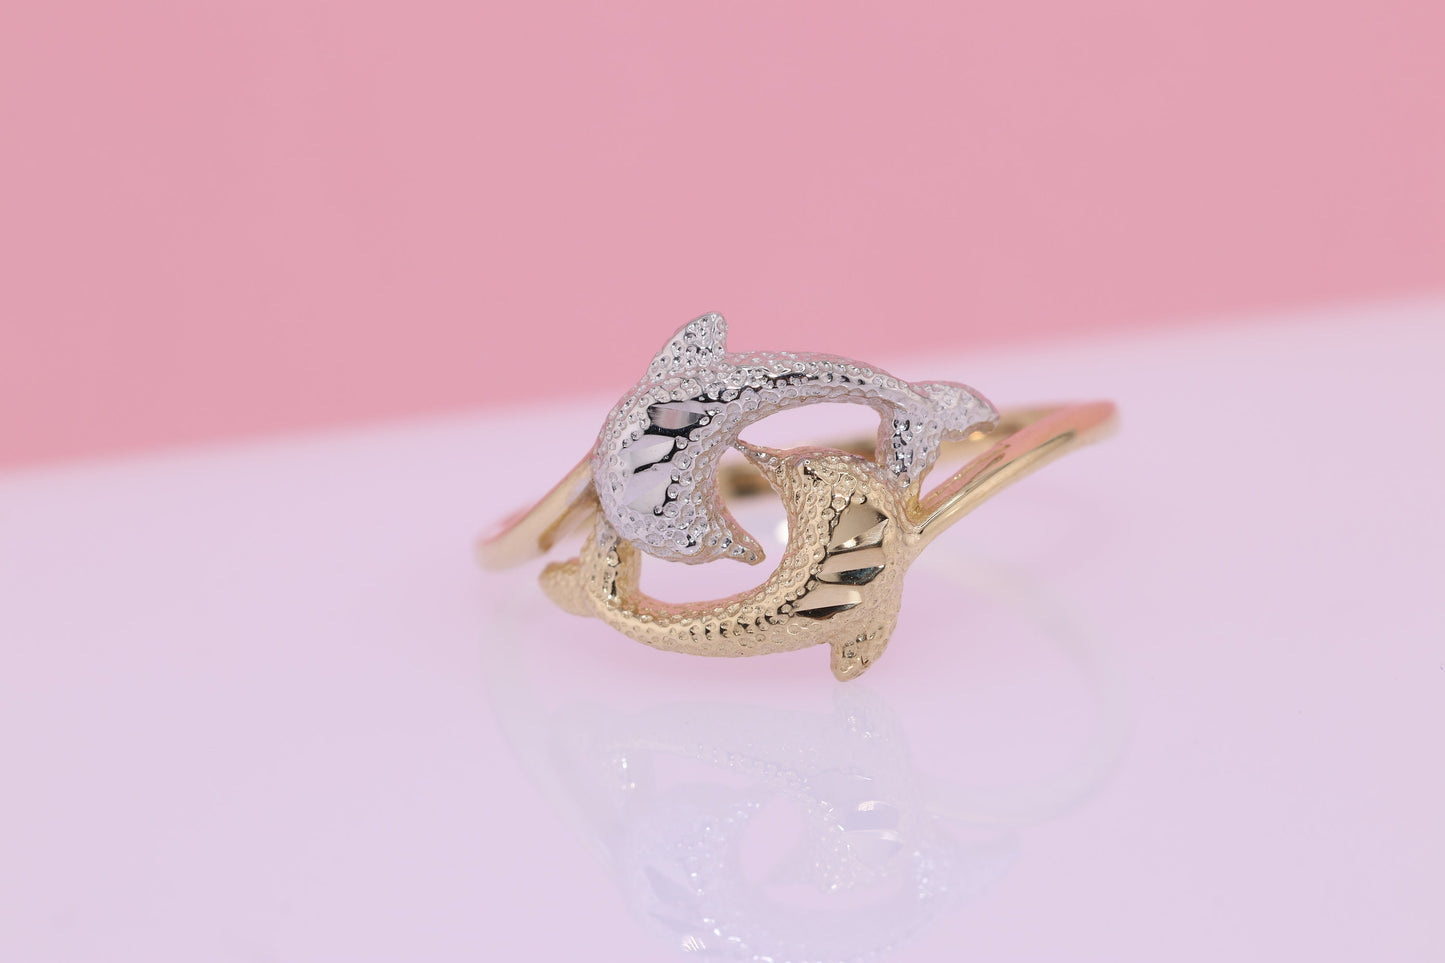 14k Gold Dolphin Ring A